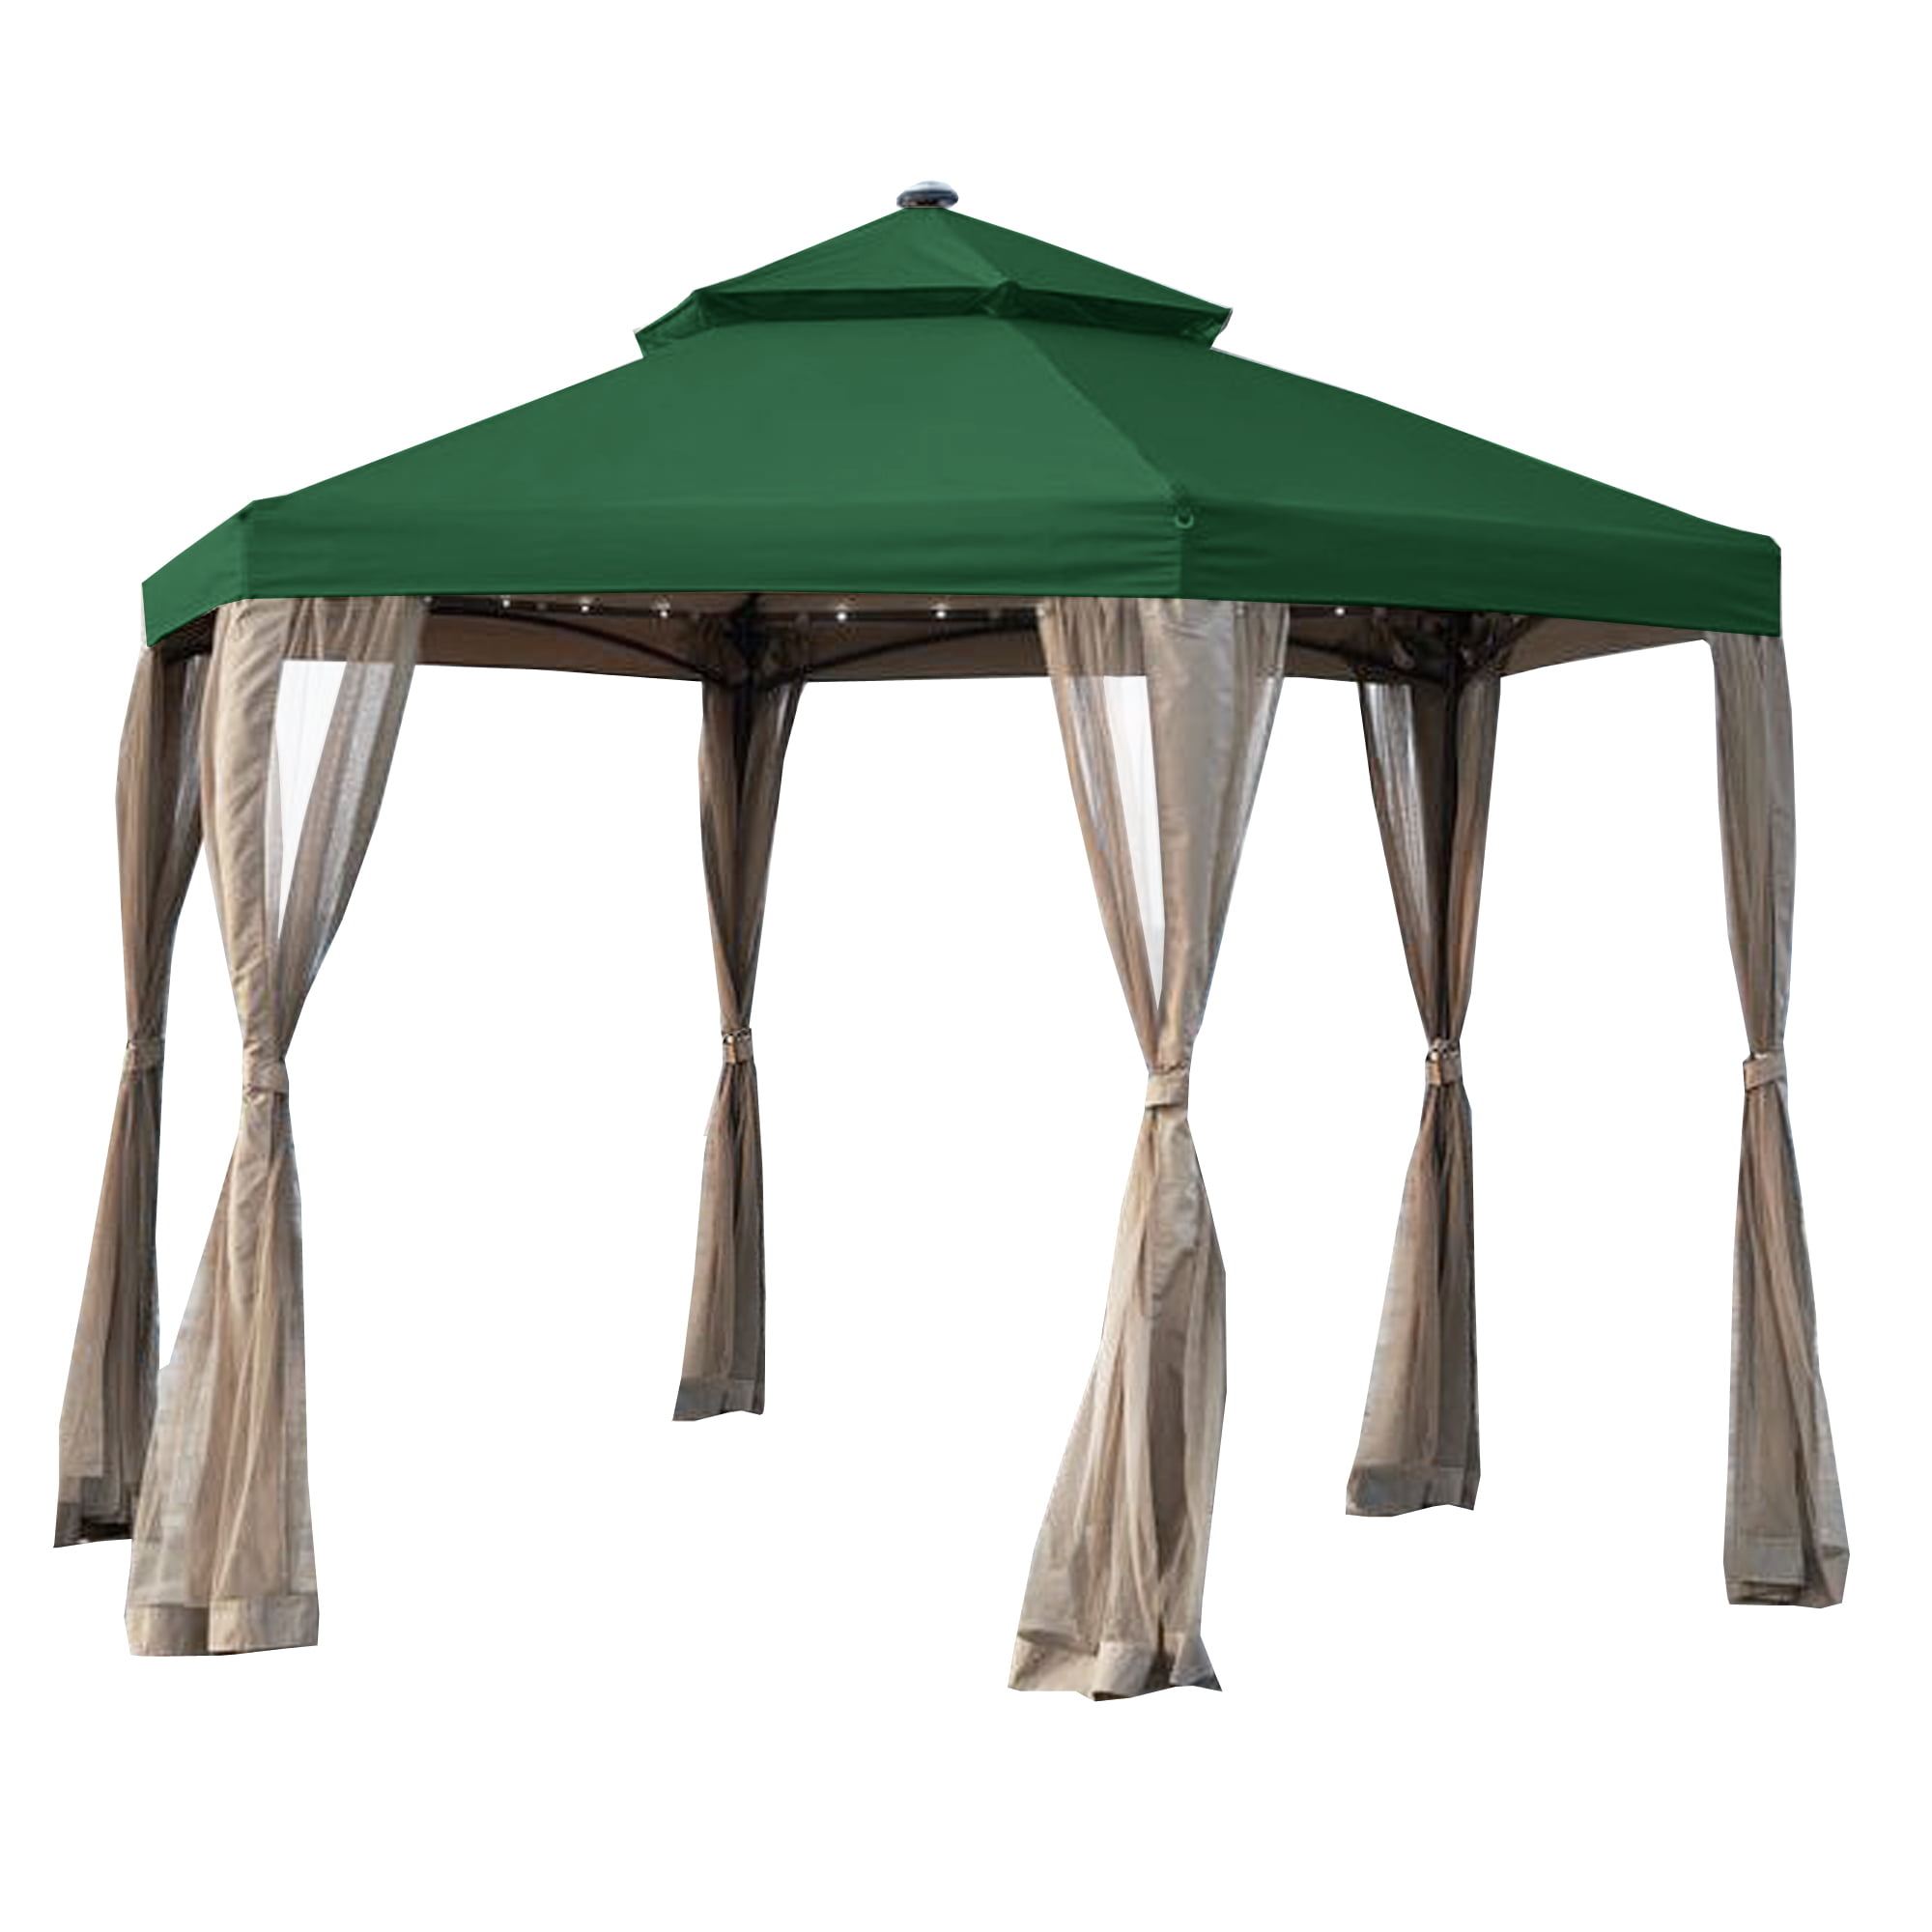 Details about    Replacement Canopy for The Hampton Bay Solar Hexagon Gazebo Standard Beige 